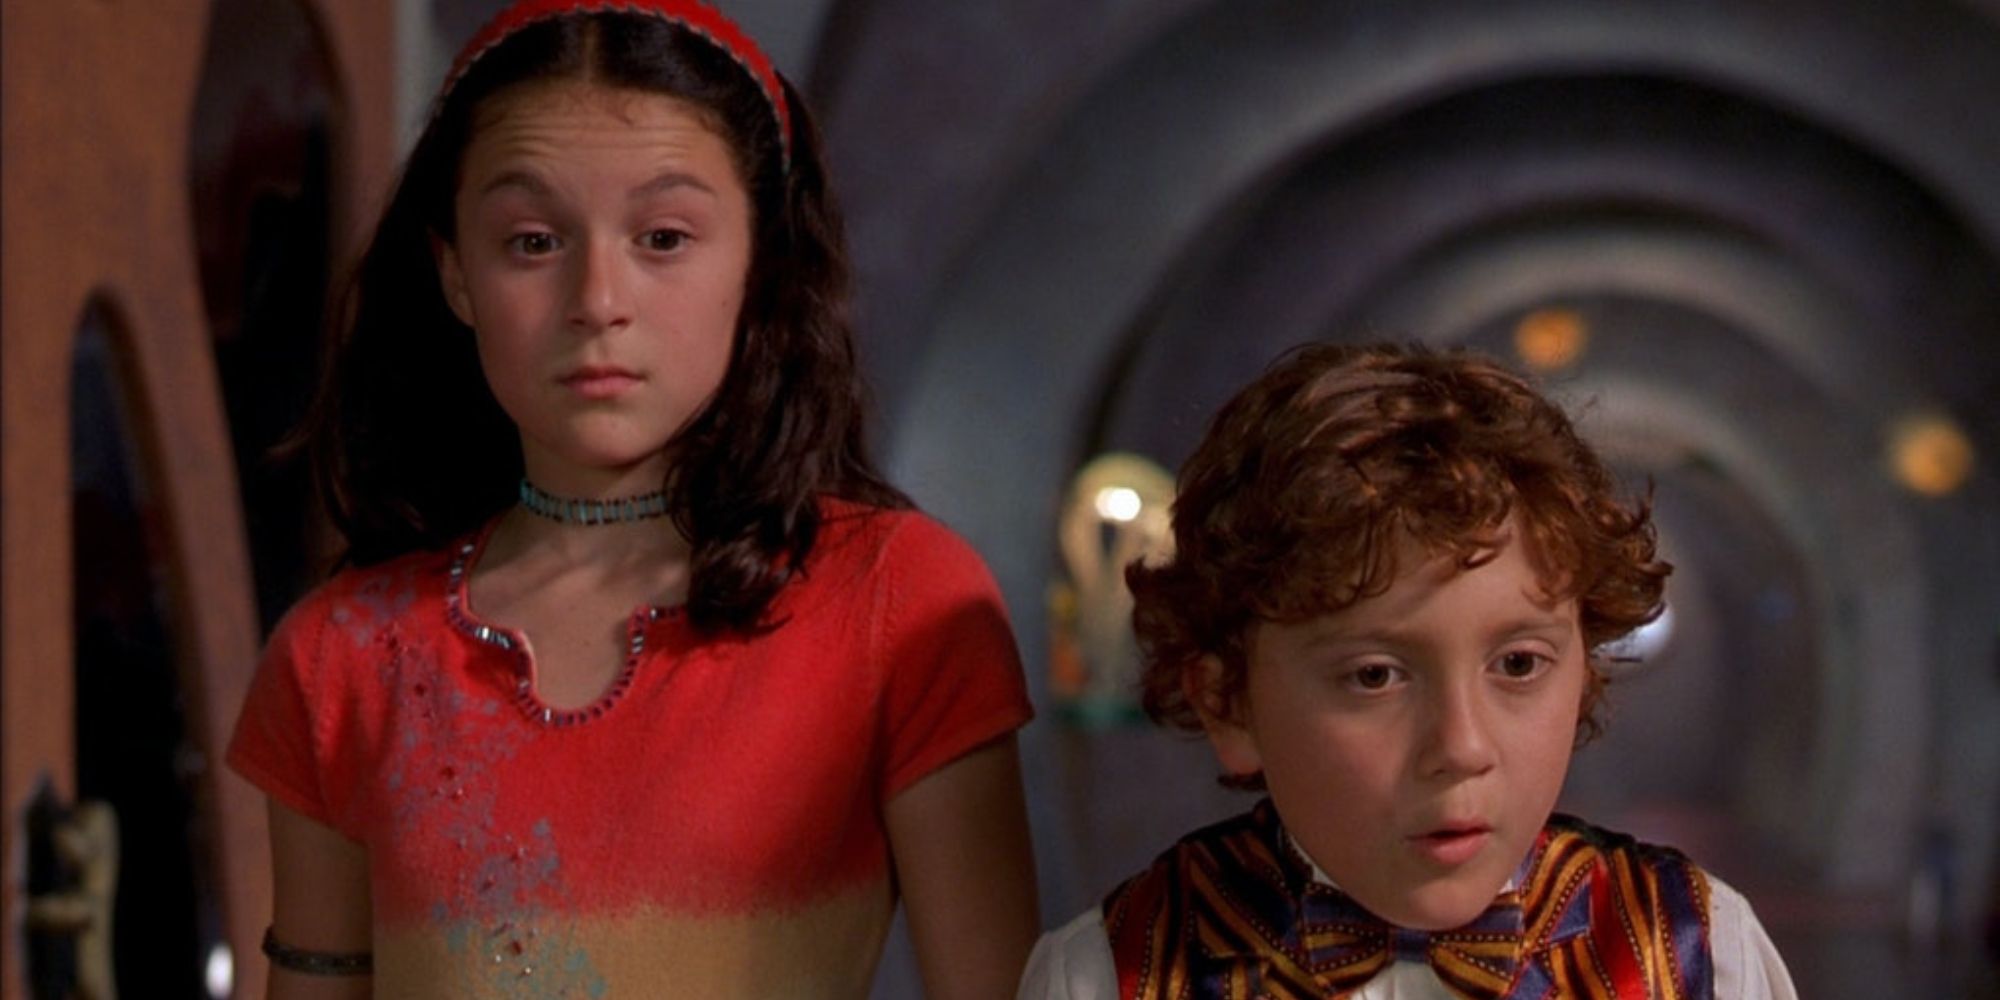 Still from Spy Kids of surprised main characters